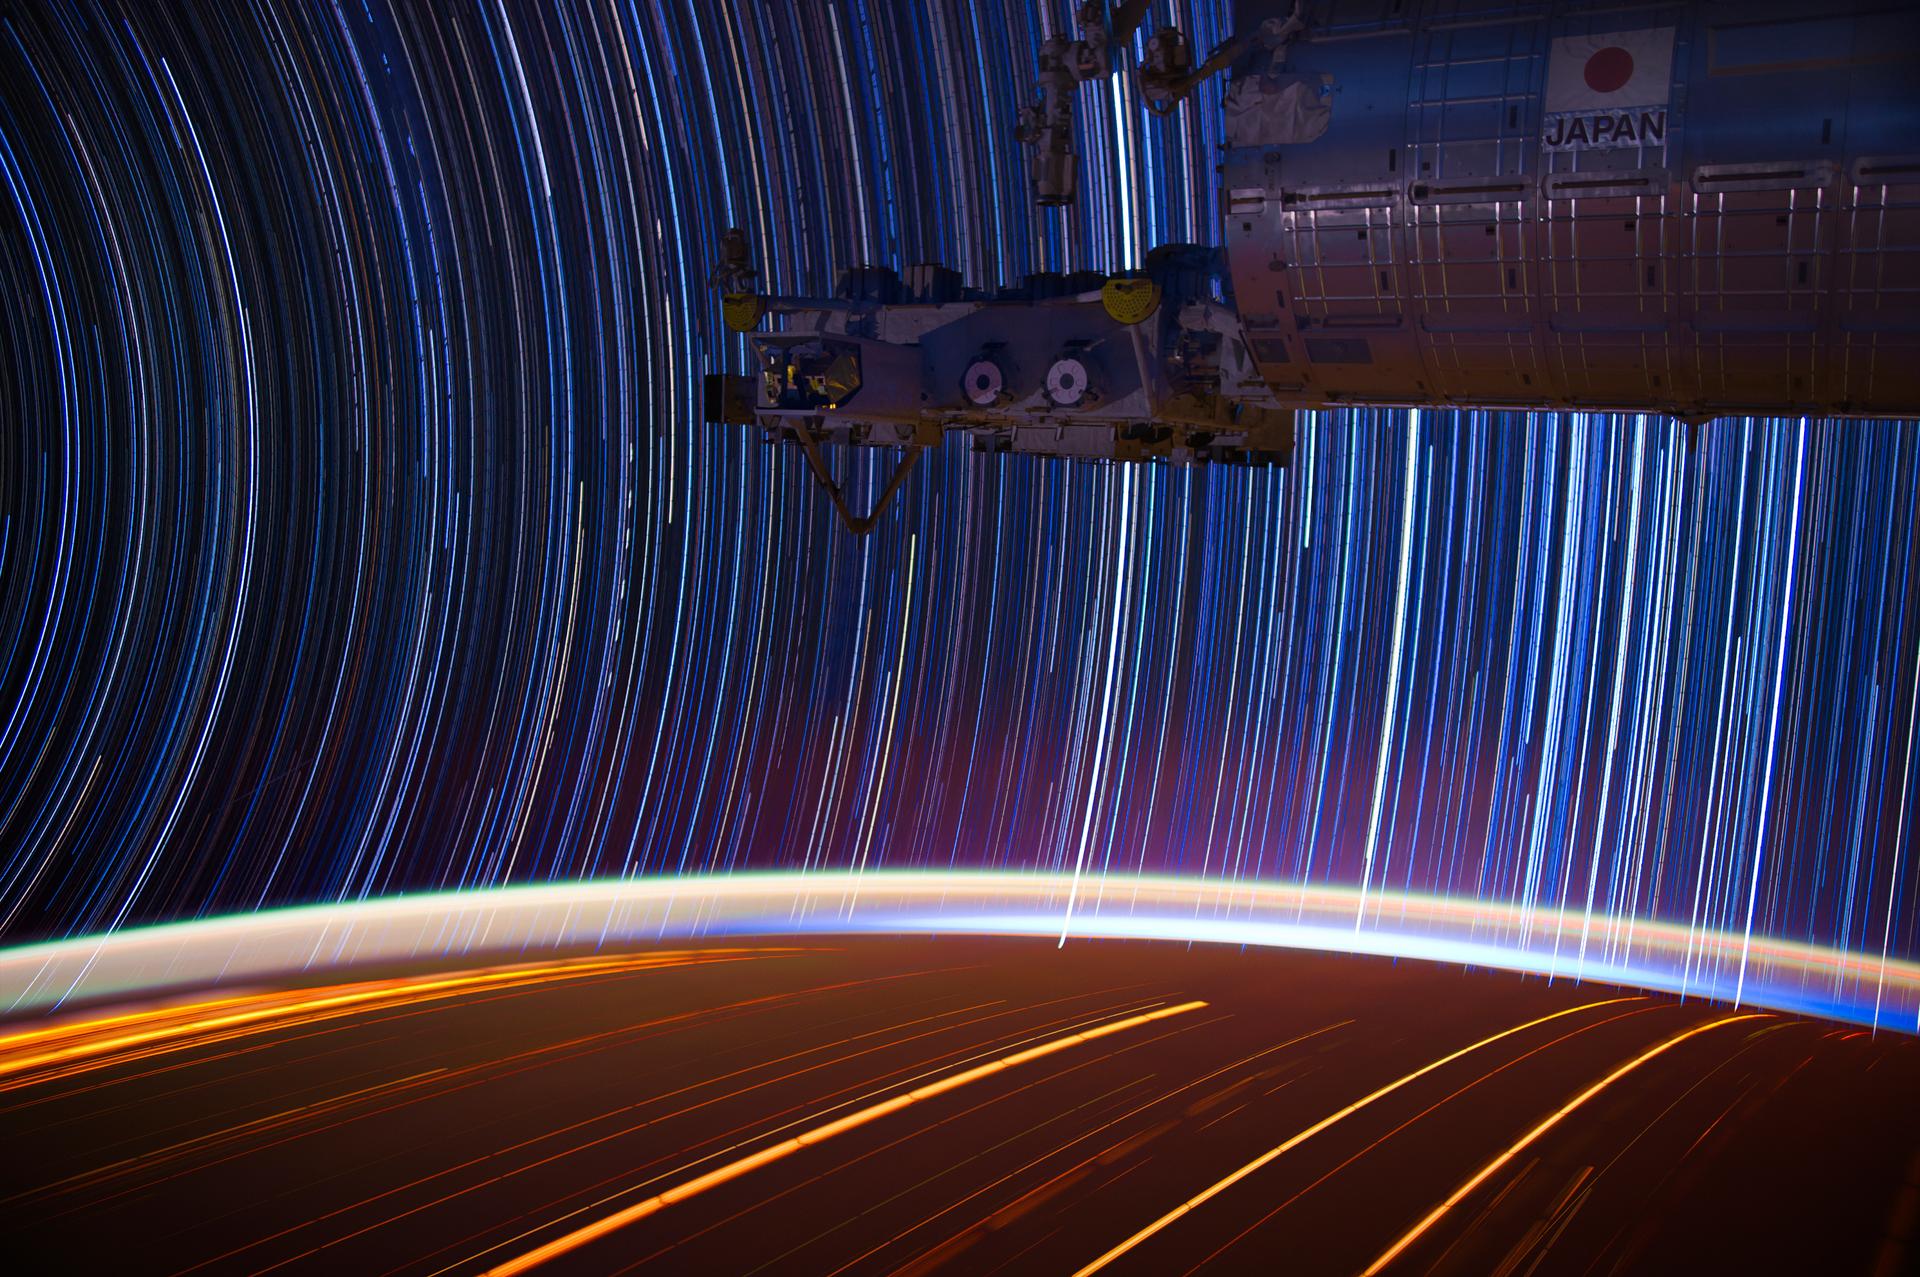 Star trails, as seen from the International Space Station